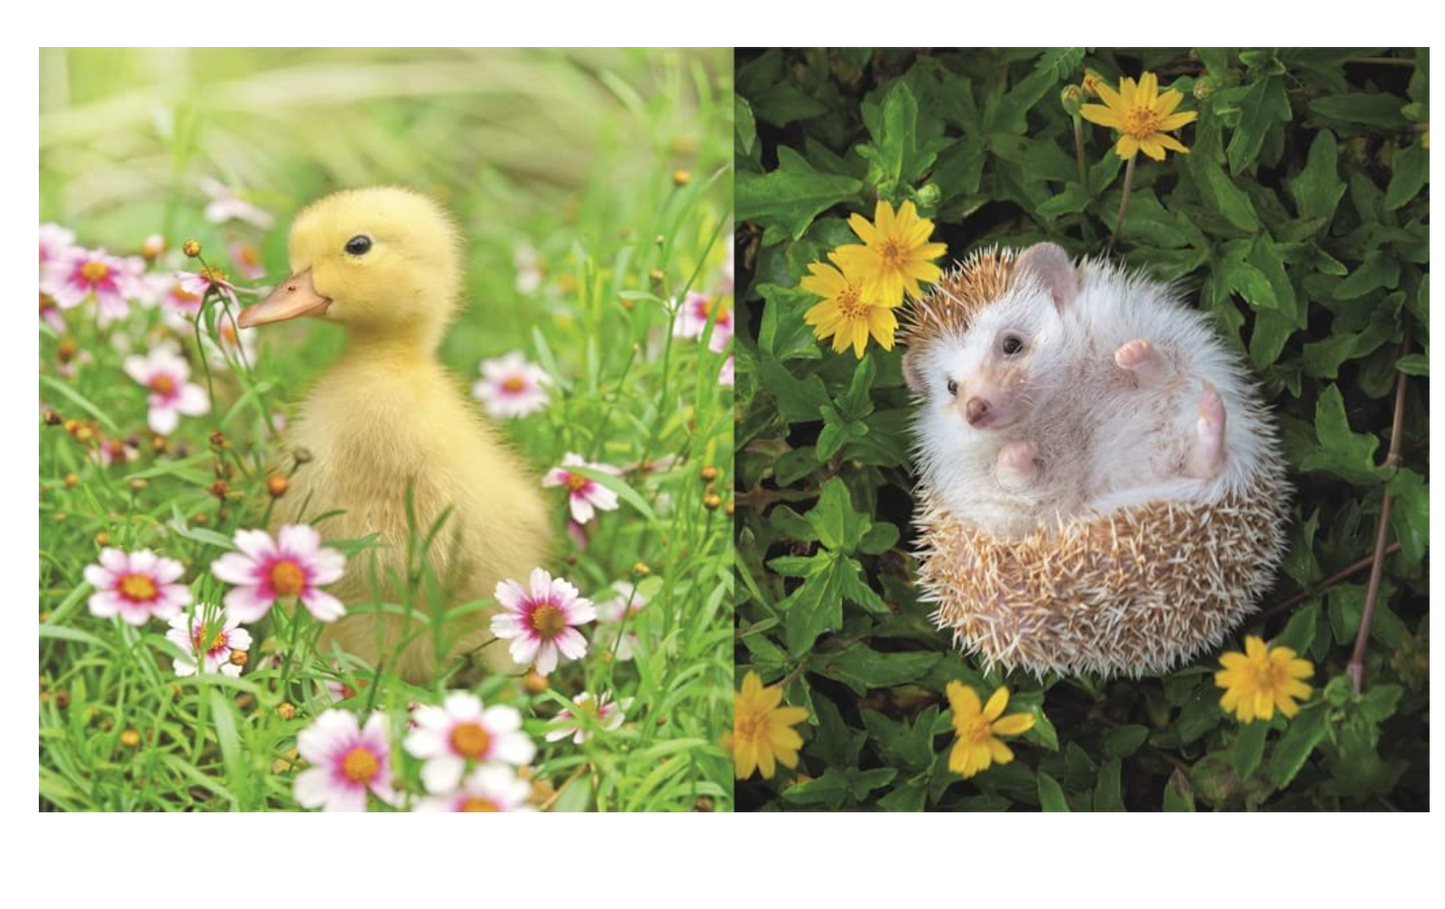 This Book Is Literally Just Pictures of Tiny Animals That Will Make You Smile Book - 96 pages